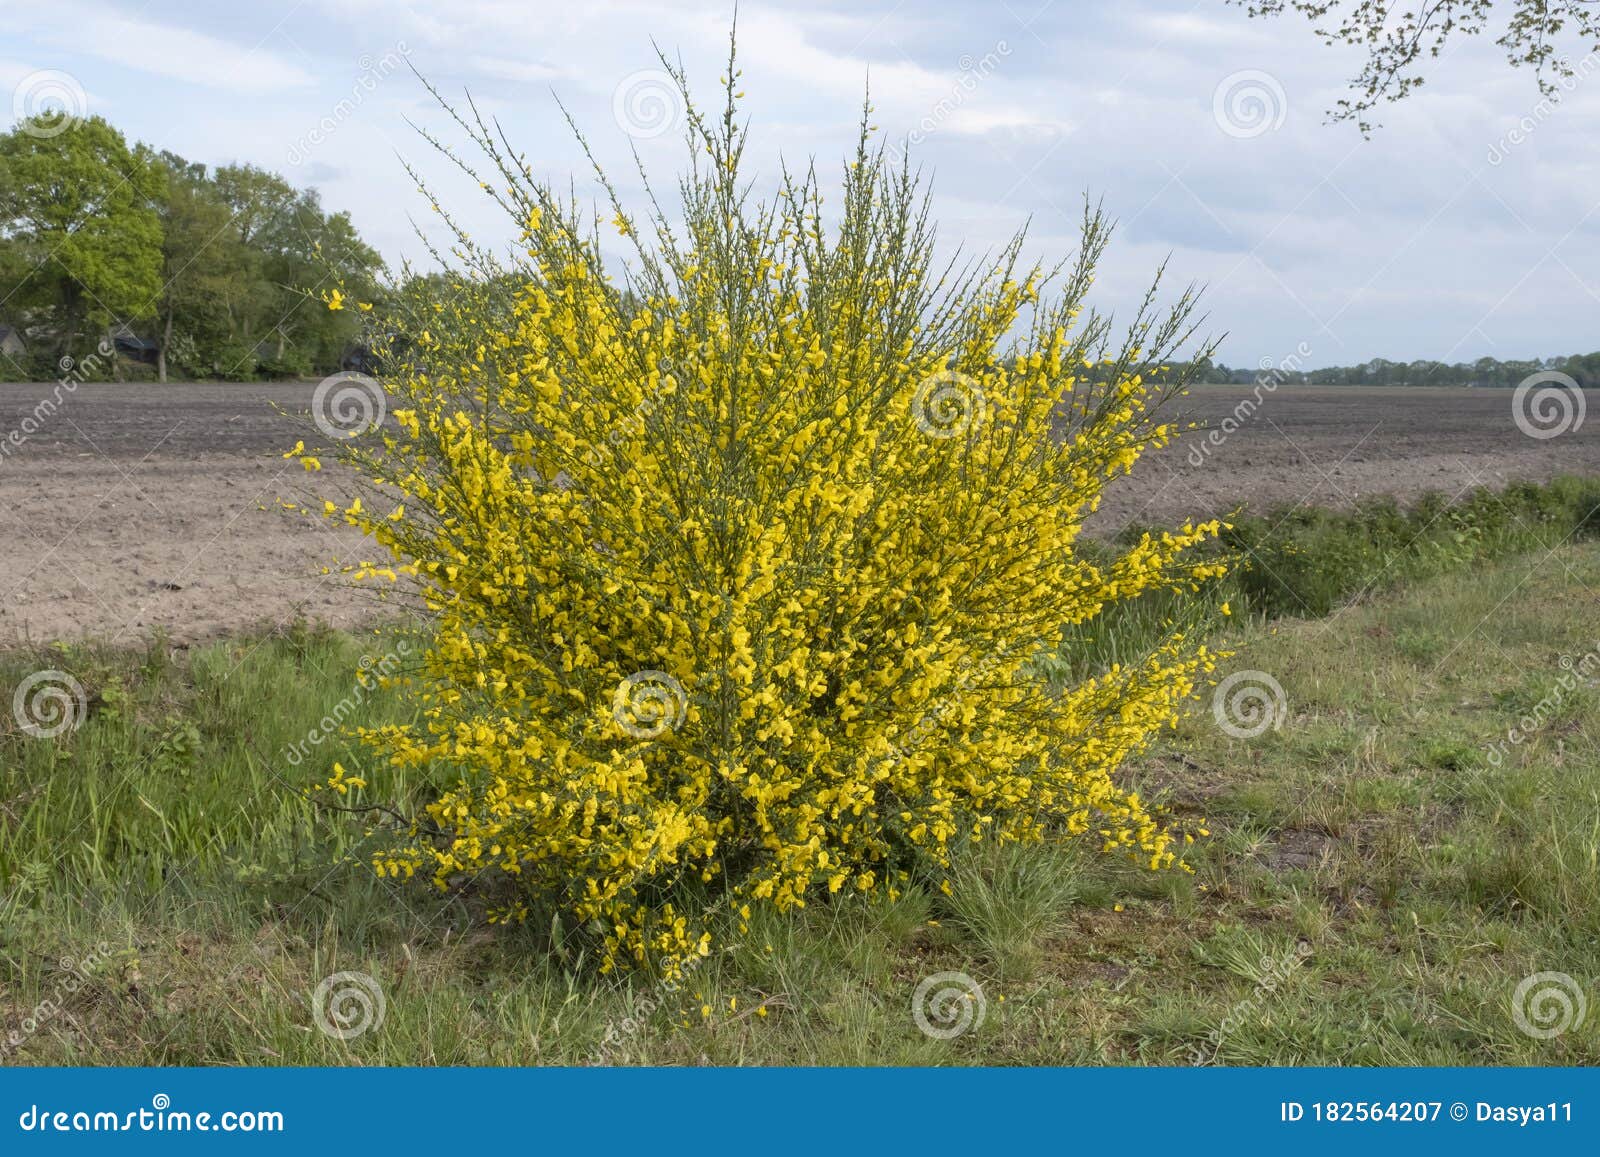 Bright Yellow Broom or Ginsestra Flower Latin Name Cytisus Scoparius or  Spachianus Close Up in Spring in Italy Blooming an Stock Image - Image of  cytisus, blossom: 182564207